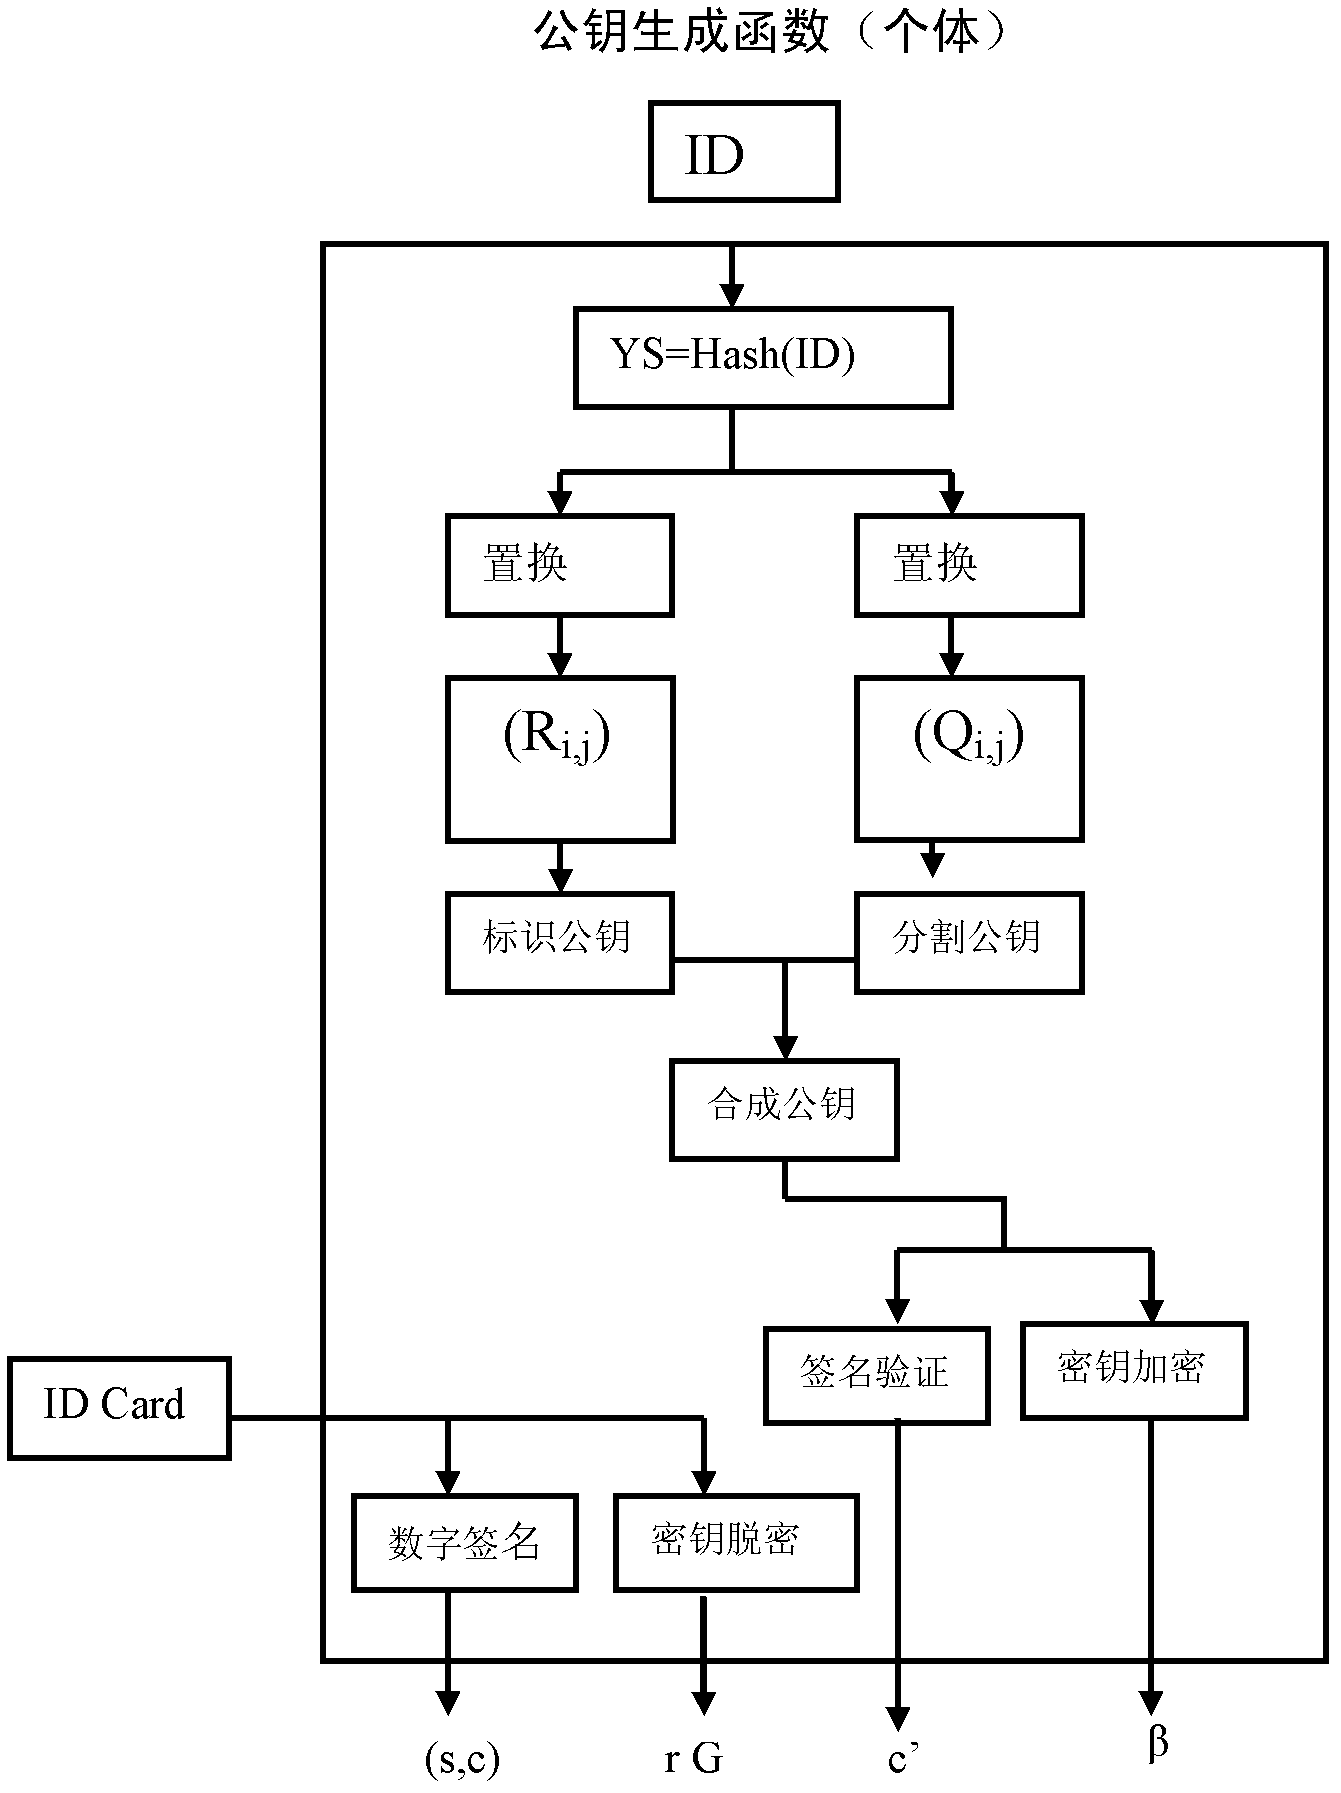 Implementation method and system for resisting quantum computation attack based on CPK public key system